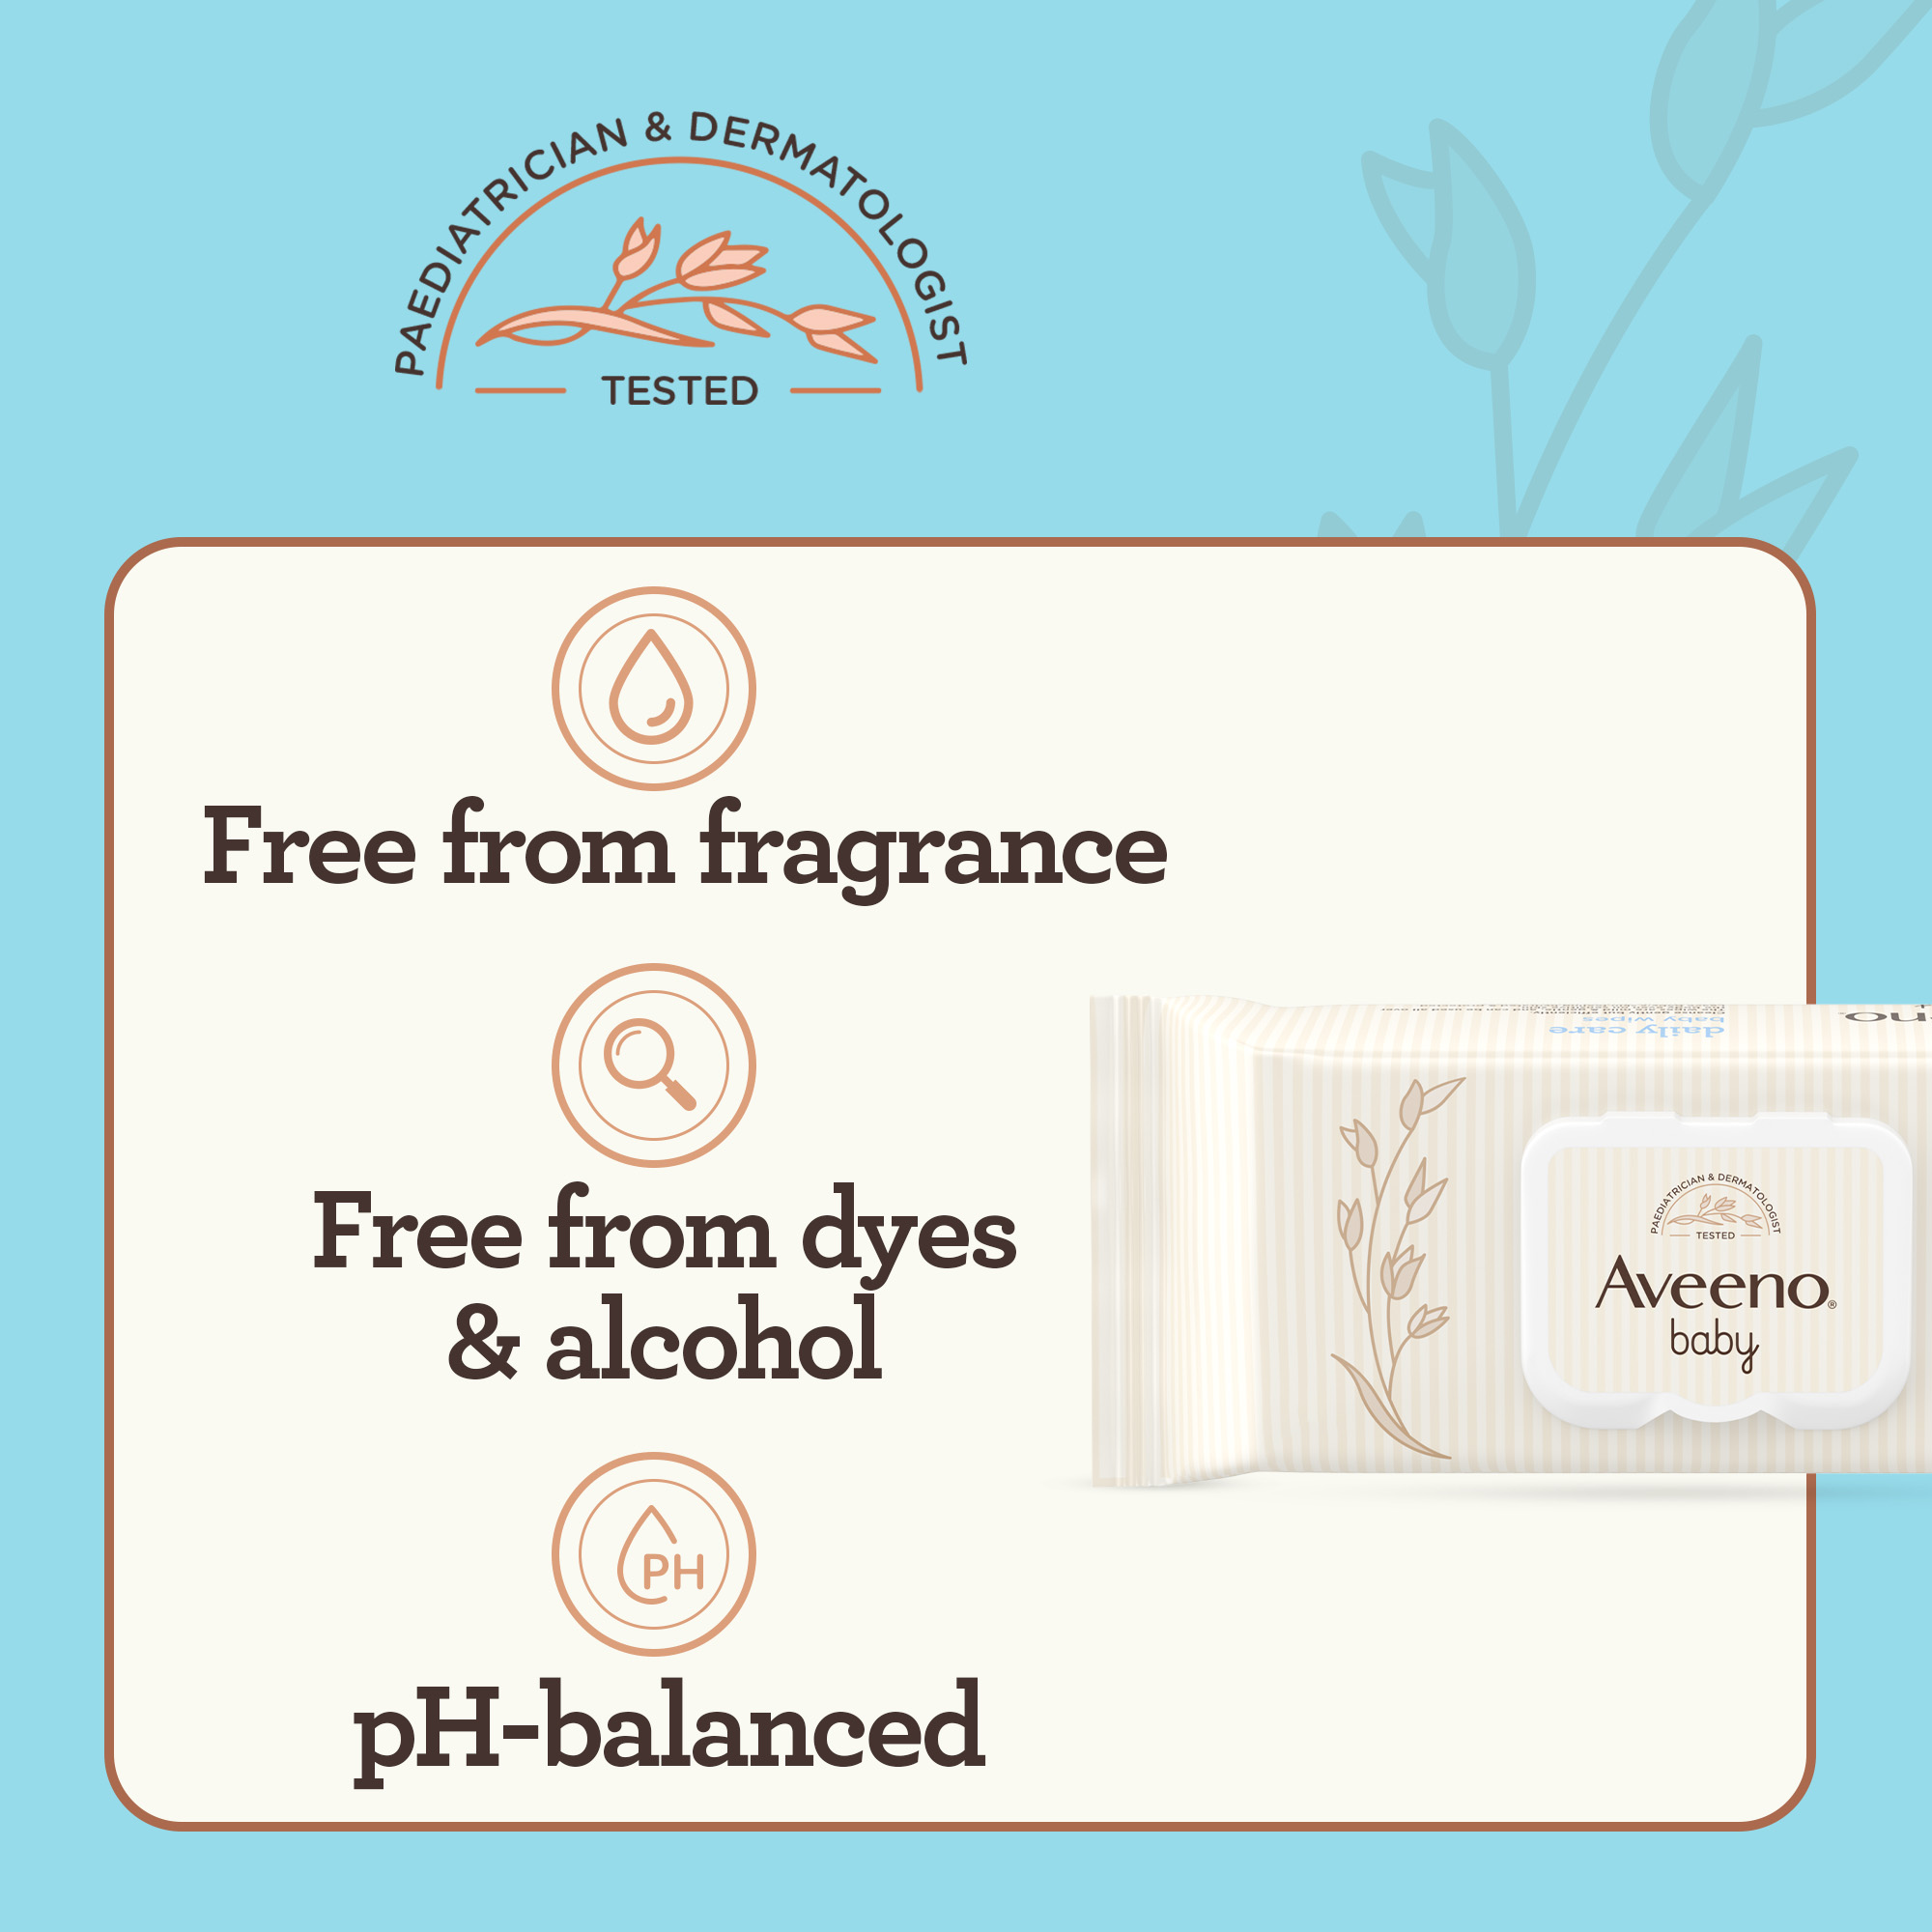 Free from fragrance. Free from dyes & alcohol. pH-balanced